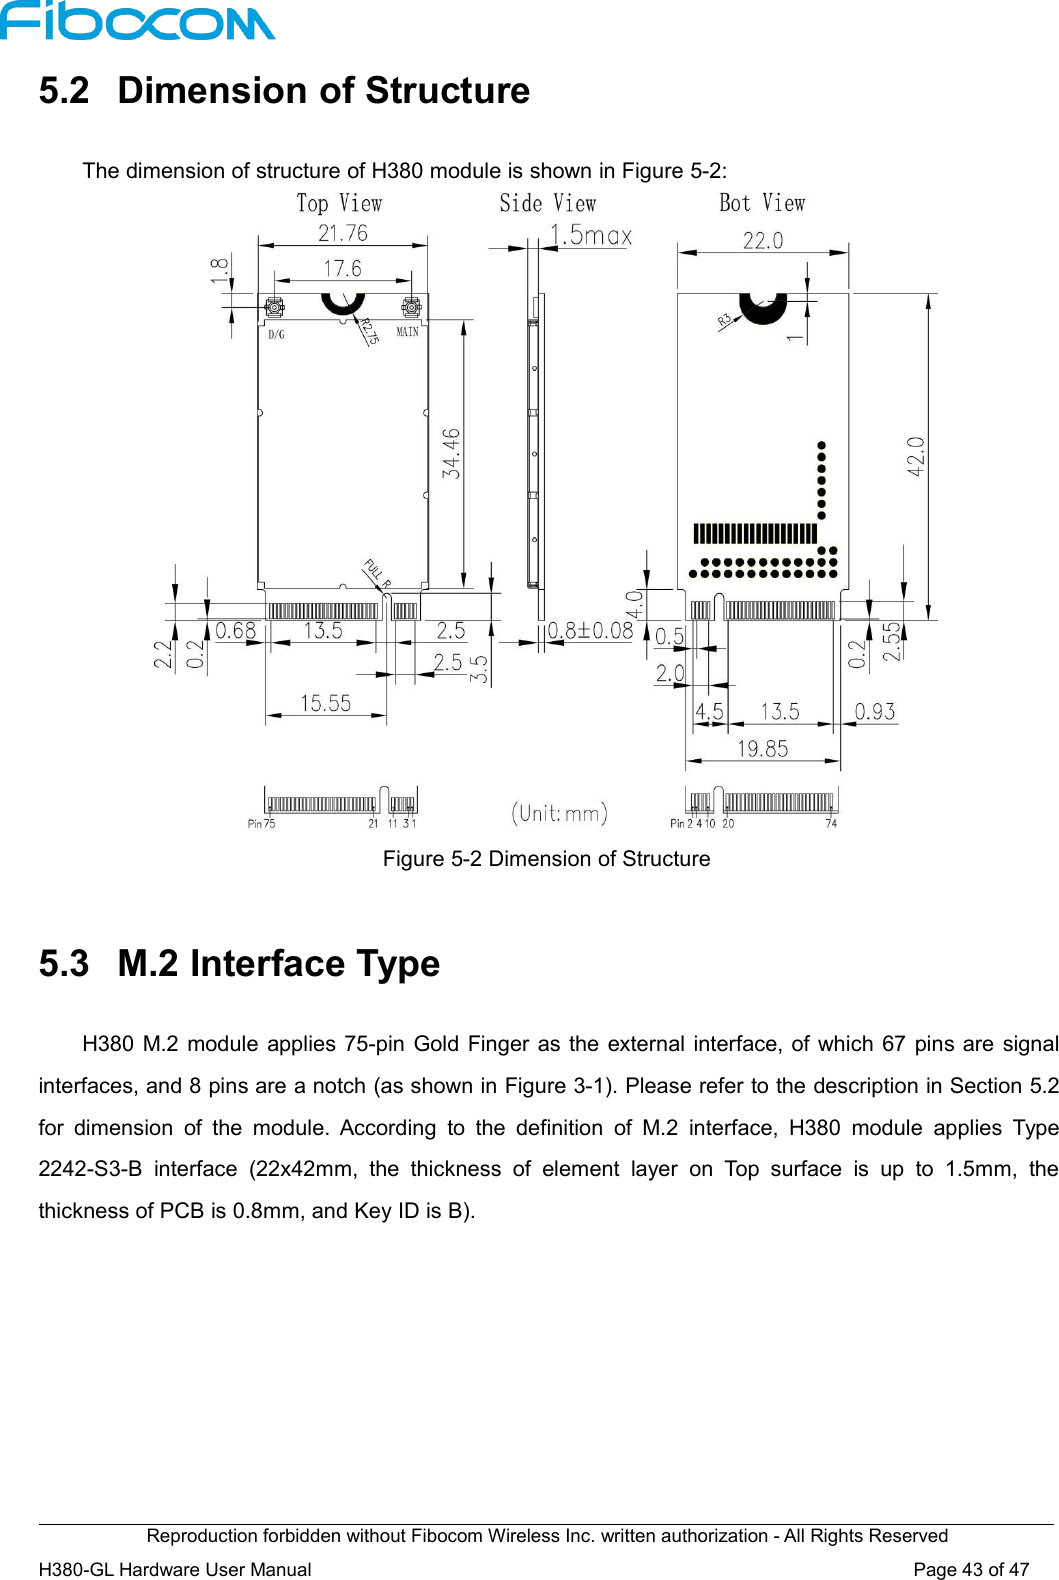 Reproduction forbidden without Fibocom Wireless Inc. written authorization - All Rights ReservedH380-GL Hardware User Manual Page43of475.2 Dimension of StructureThe dimension of structure of H380 module is shown in Figure 5-2:Figure 5-2 Dimension of Structure5.3 M.2 Interface TypeH380 M.2 module applies 75-pin Gold Finger as the external interface, of which 67 pins are signalinterfaces, and 8 pins are a notch (as shown in Figure 3-1). Please refer to the description in Section 5.2for dimension of the module. According to the definition of M.2 interface, H380 module applies Type2242-S3-B interface (22x42mm, the thickness of element layer on Top surface is up to 1.5mm, thethickness of PCB is 0.8mm, and Key ID is B).